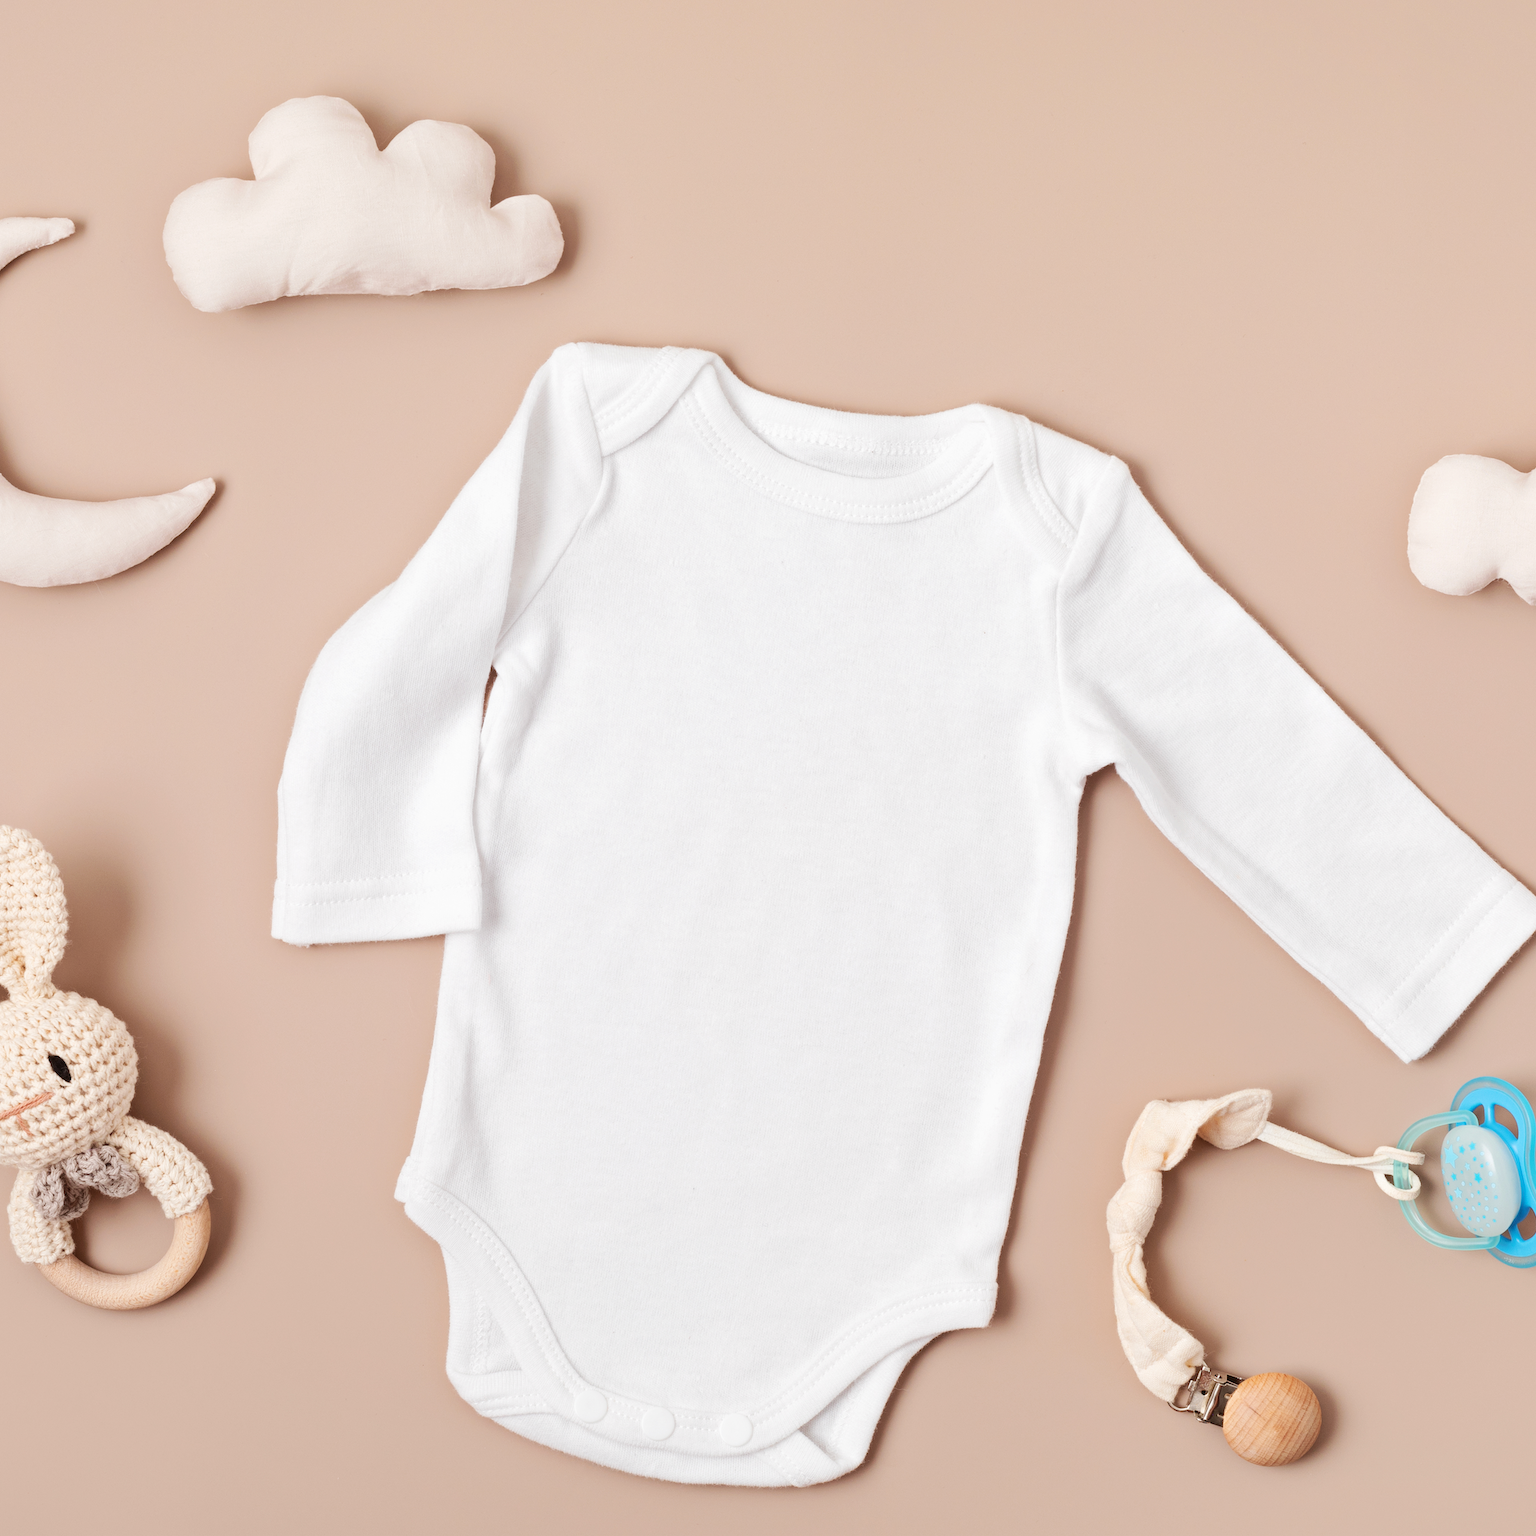 How Many Baby Clothes Do You Need in The First Year?